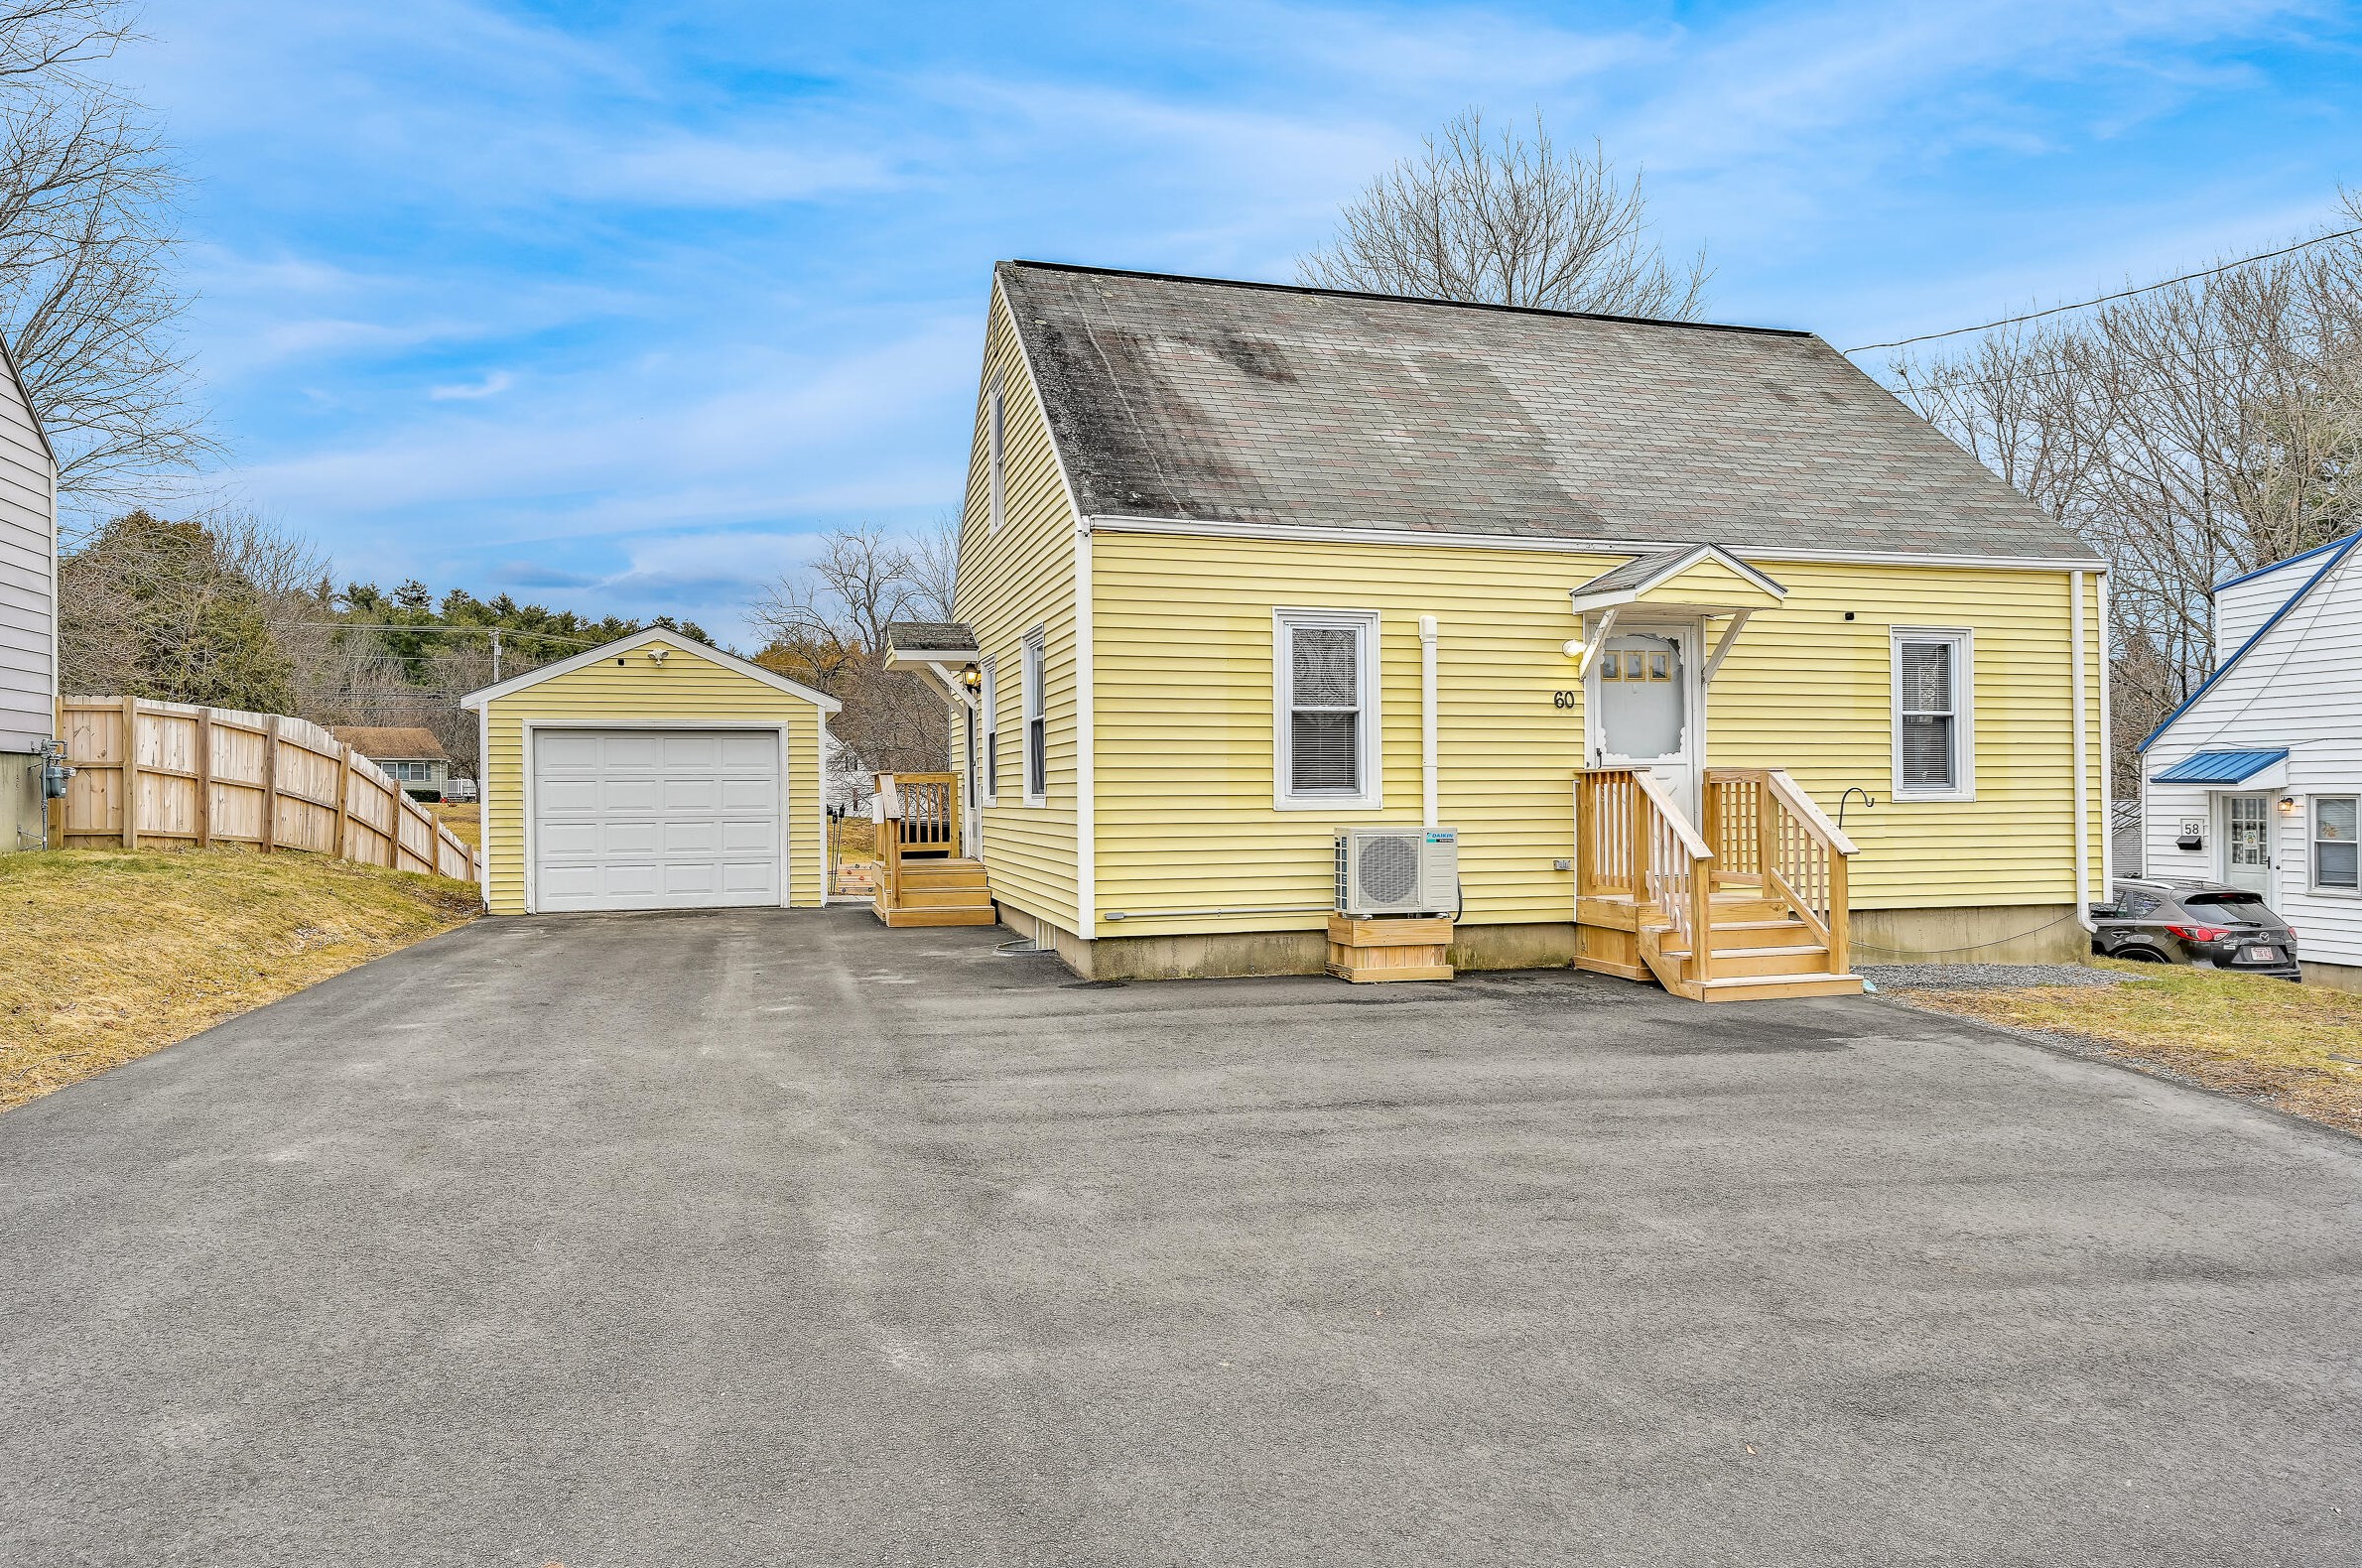 60 Newland Ave, Augusta, ME 04330